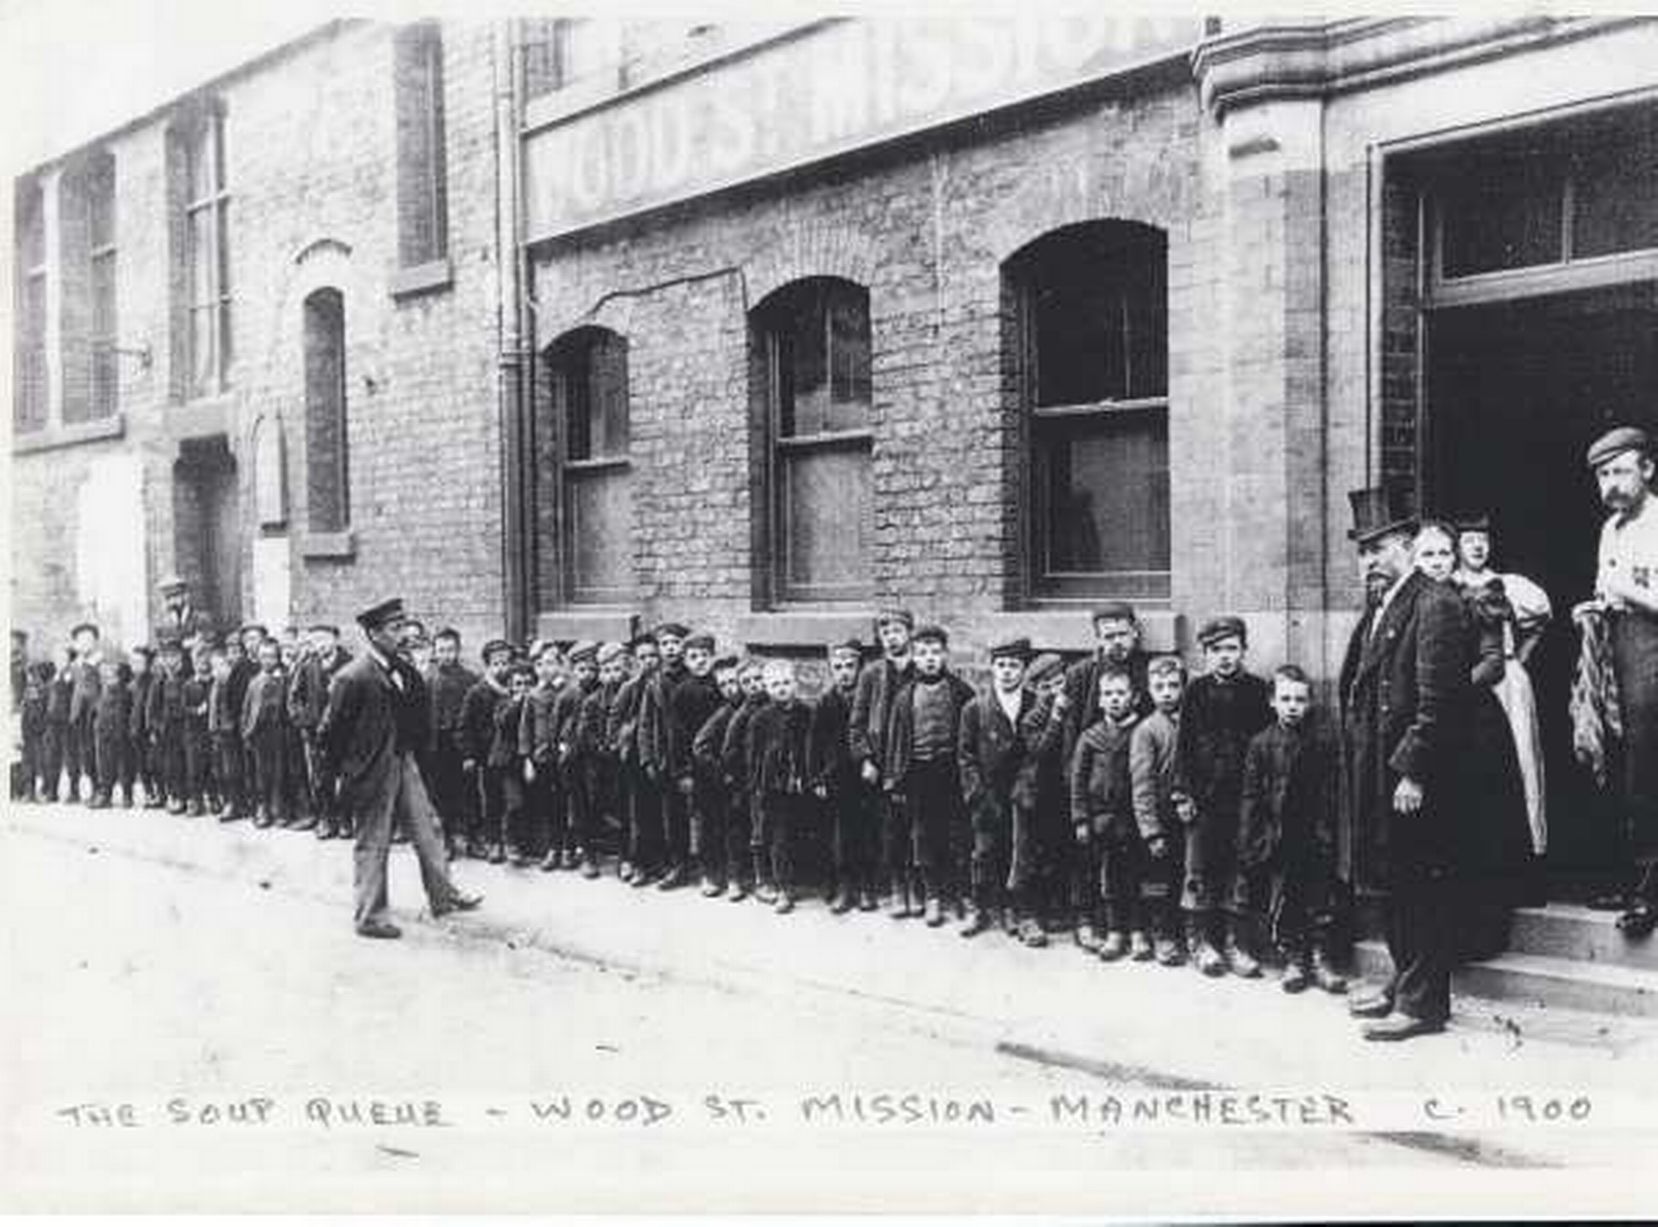 The soup queue at Wood Street Mission about 1900